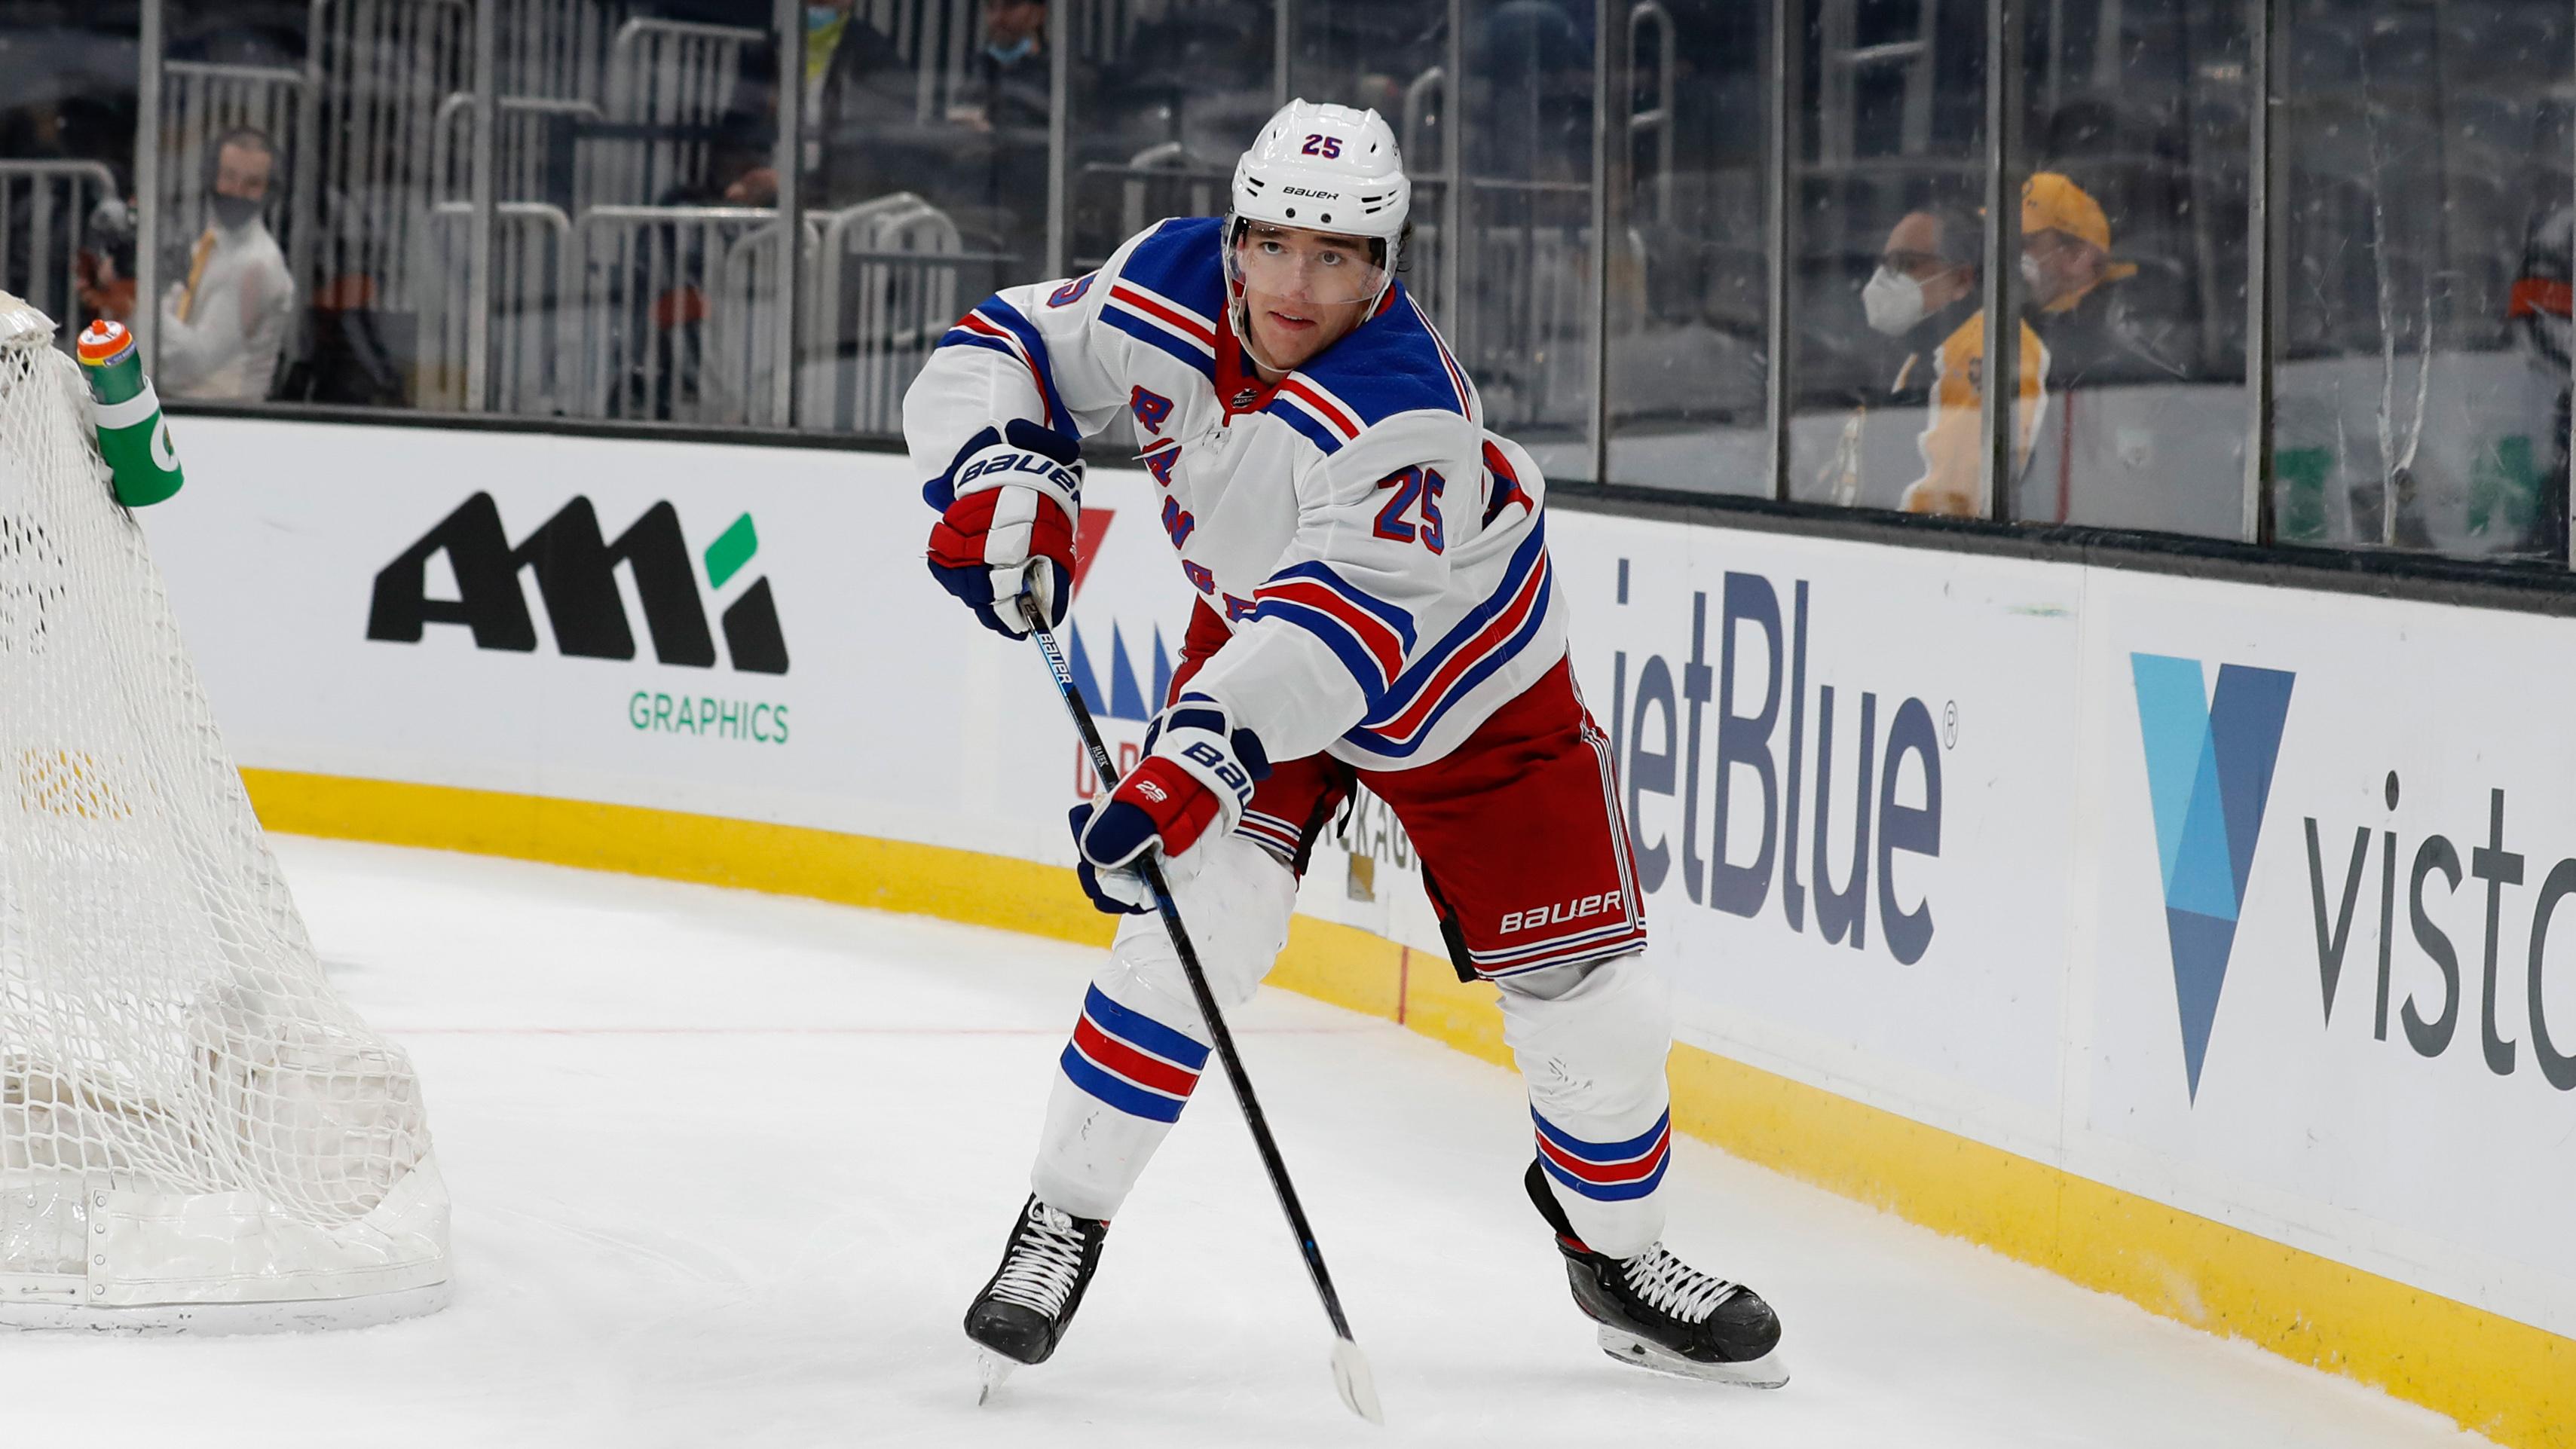 New York Rangers defenseman Libor Hajek (25) during the first period against the Boston Bruins at TD Garden. / Winslow Townson - USA TODAY Sports